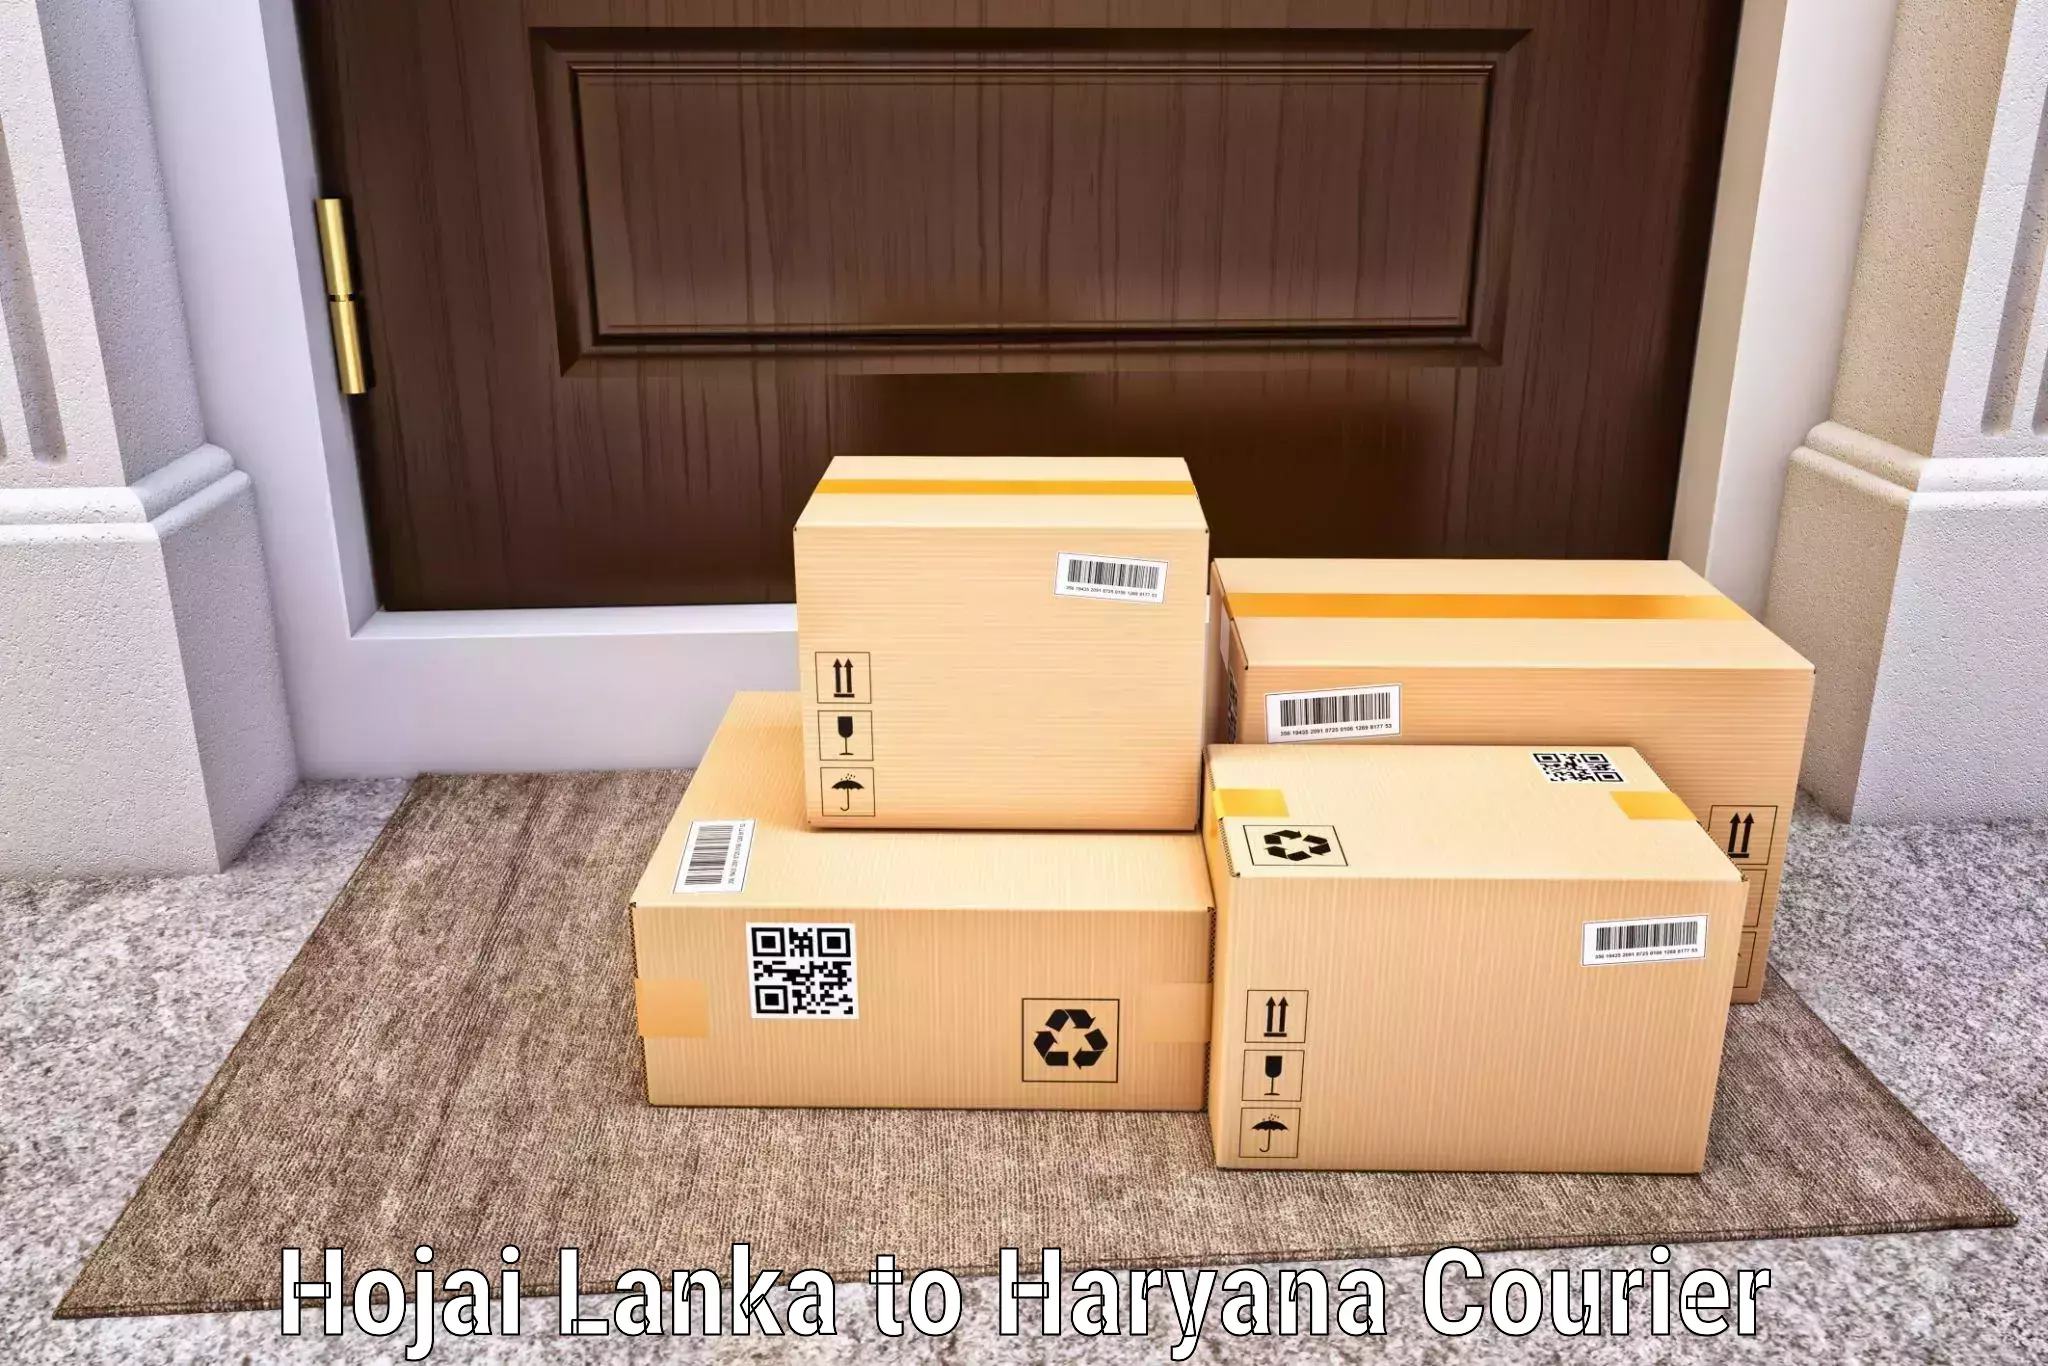 Reliable courier services Hojai Lanka to Odhan